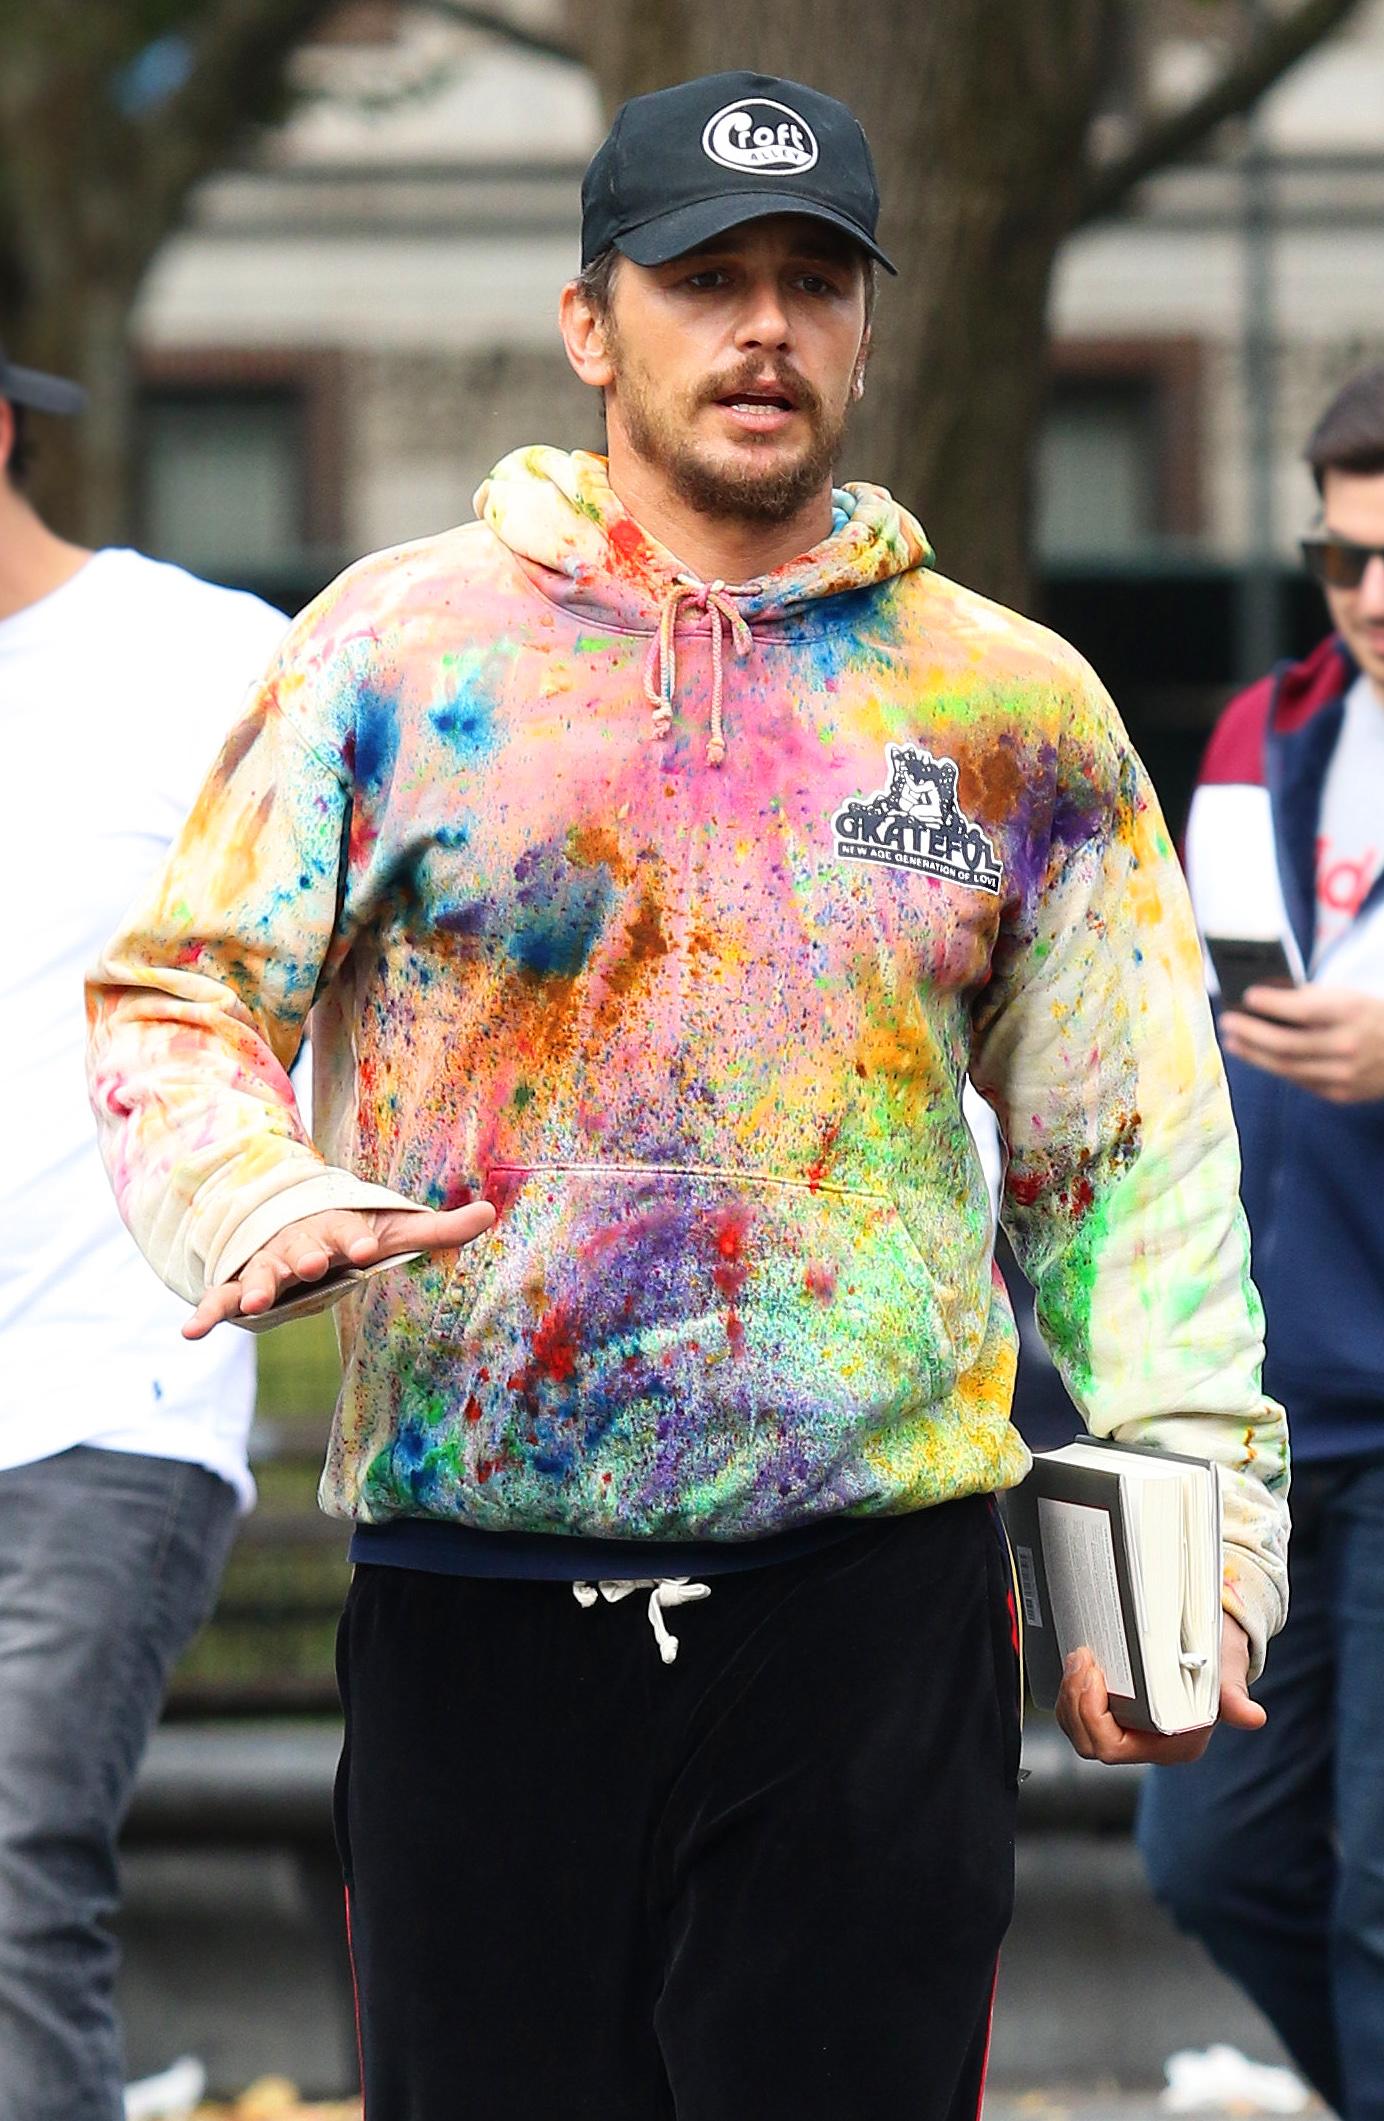 James Franco sports a Tie-Dye sweater while walking in NYC